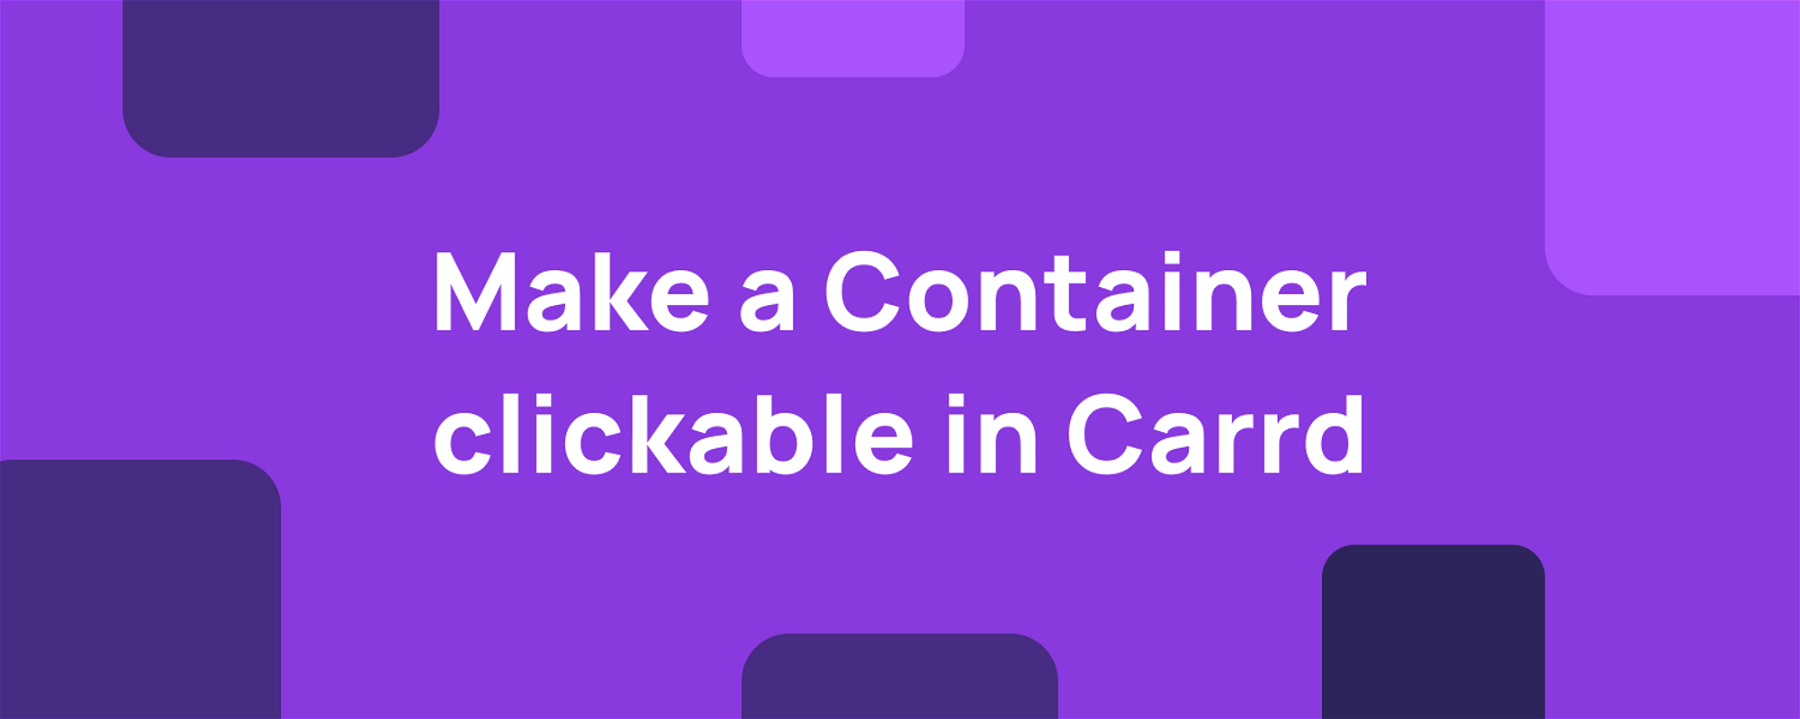 Make a Container clickable in Carrd